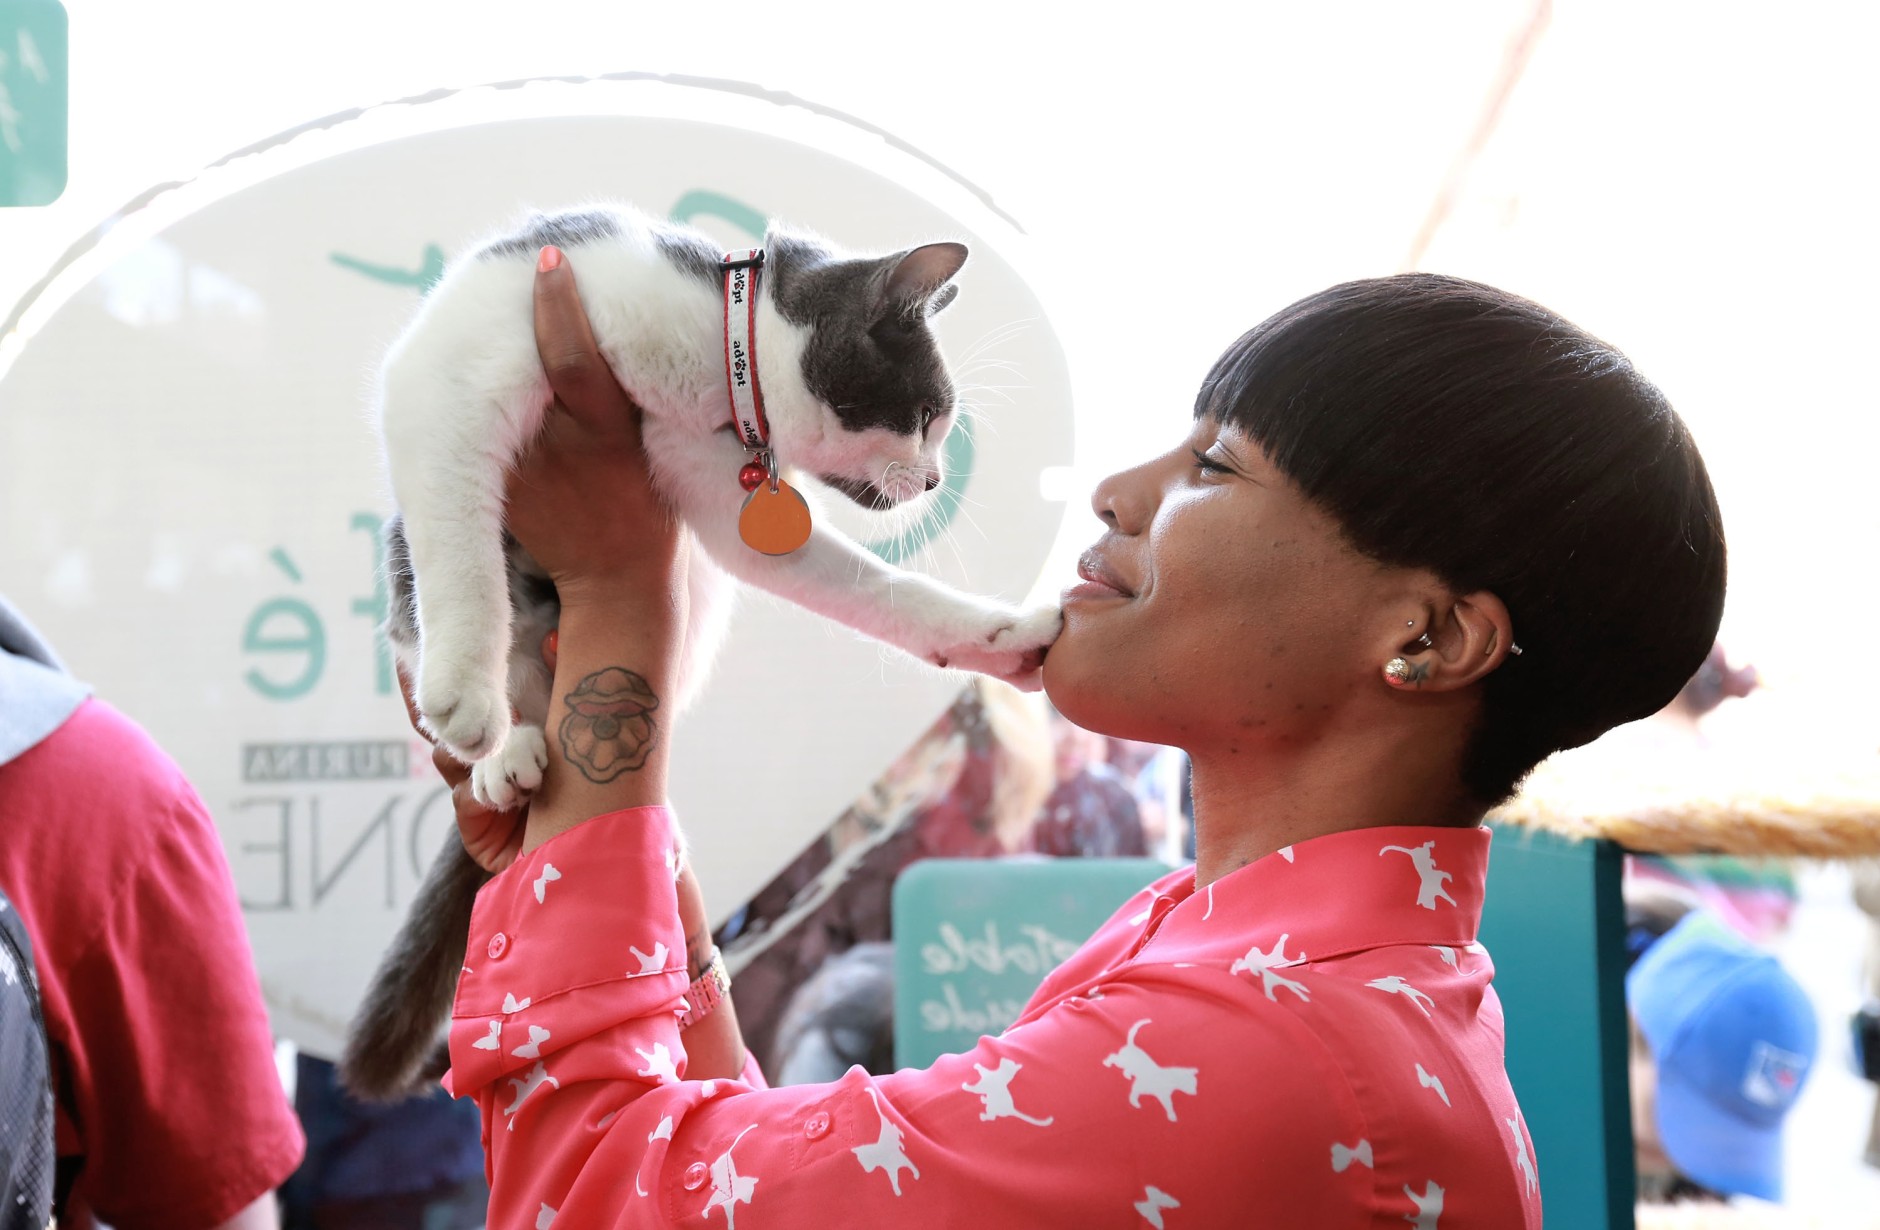 IMAGE DISTRIBUTED FOR PURINA ONE - Victoria Mills prepares to take Sushi, her newly adopted cat, home during the adoption drive taking place at the Cat Cafe by Purina ONE on Sunday, April 27, 2014, in New York. (Photo by Amy Sussman/Invision for Purina ONE/AP Images)